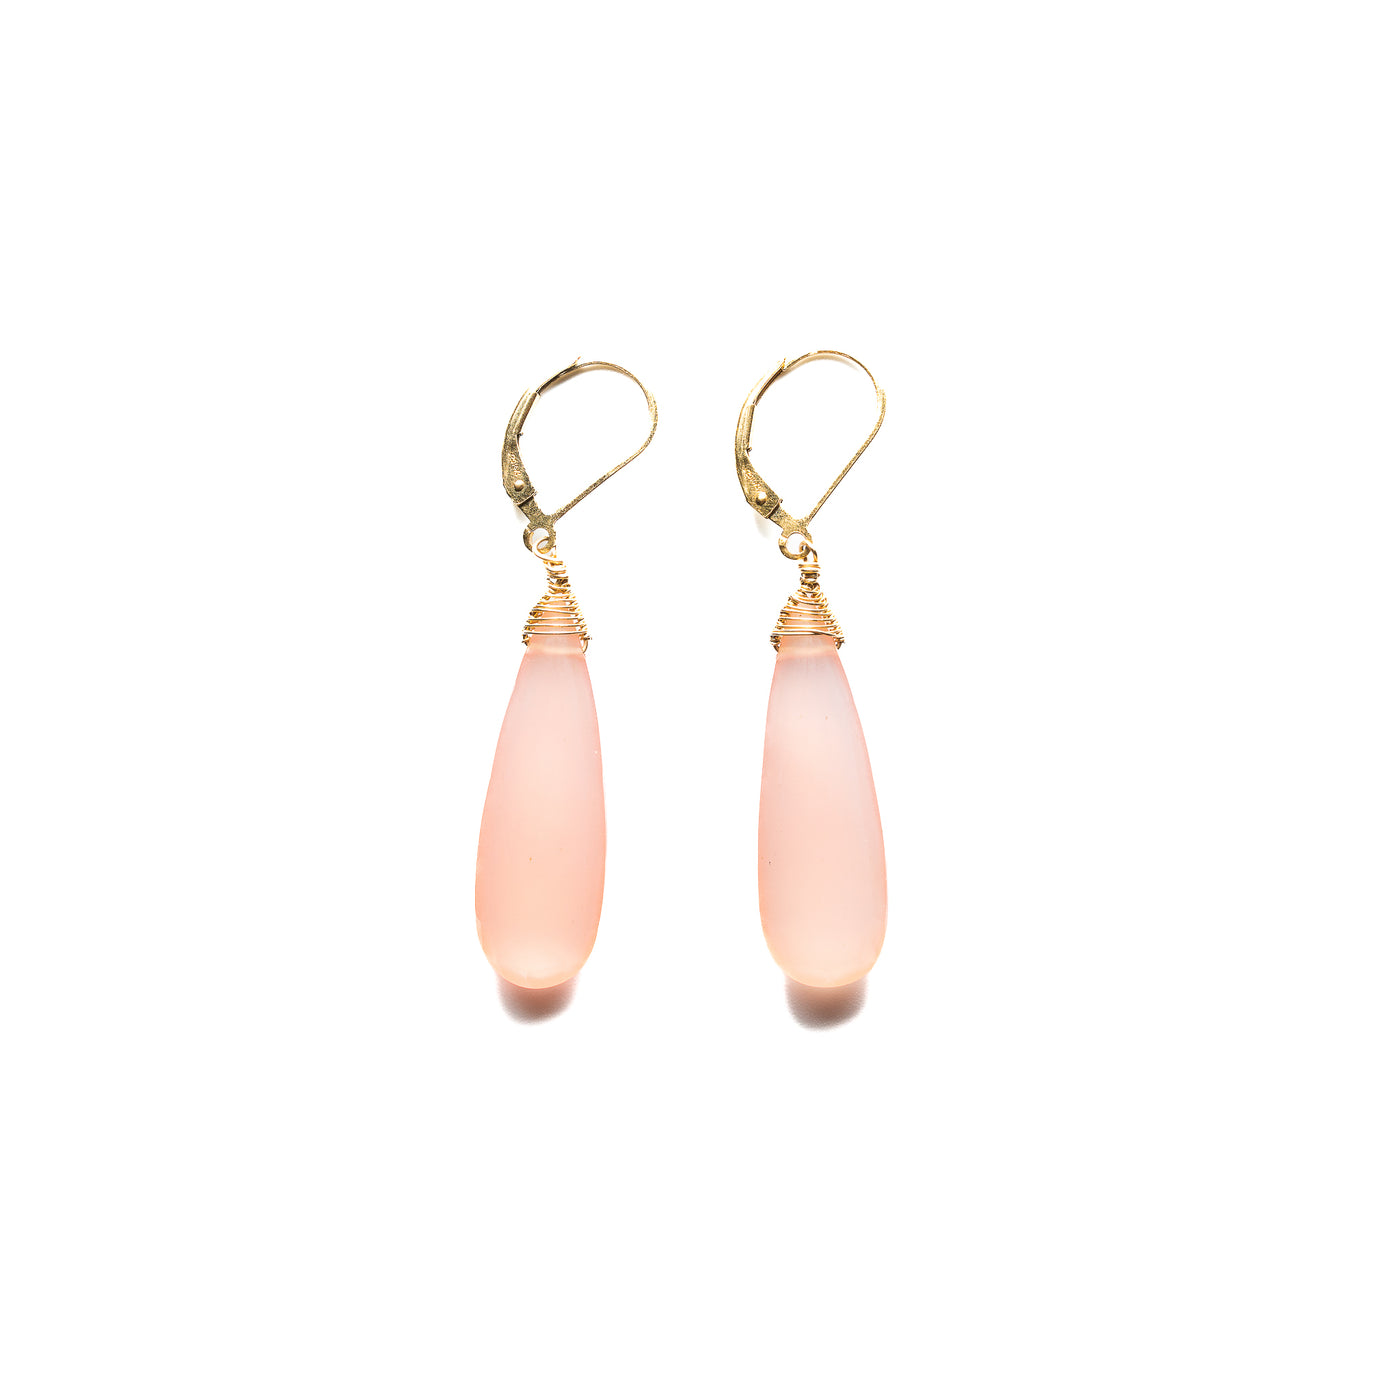 Delicate Wire Wrapped Pink Chalcedony Earrings